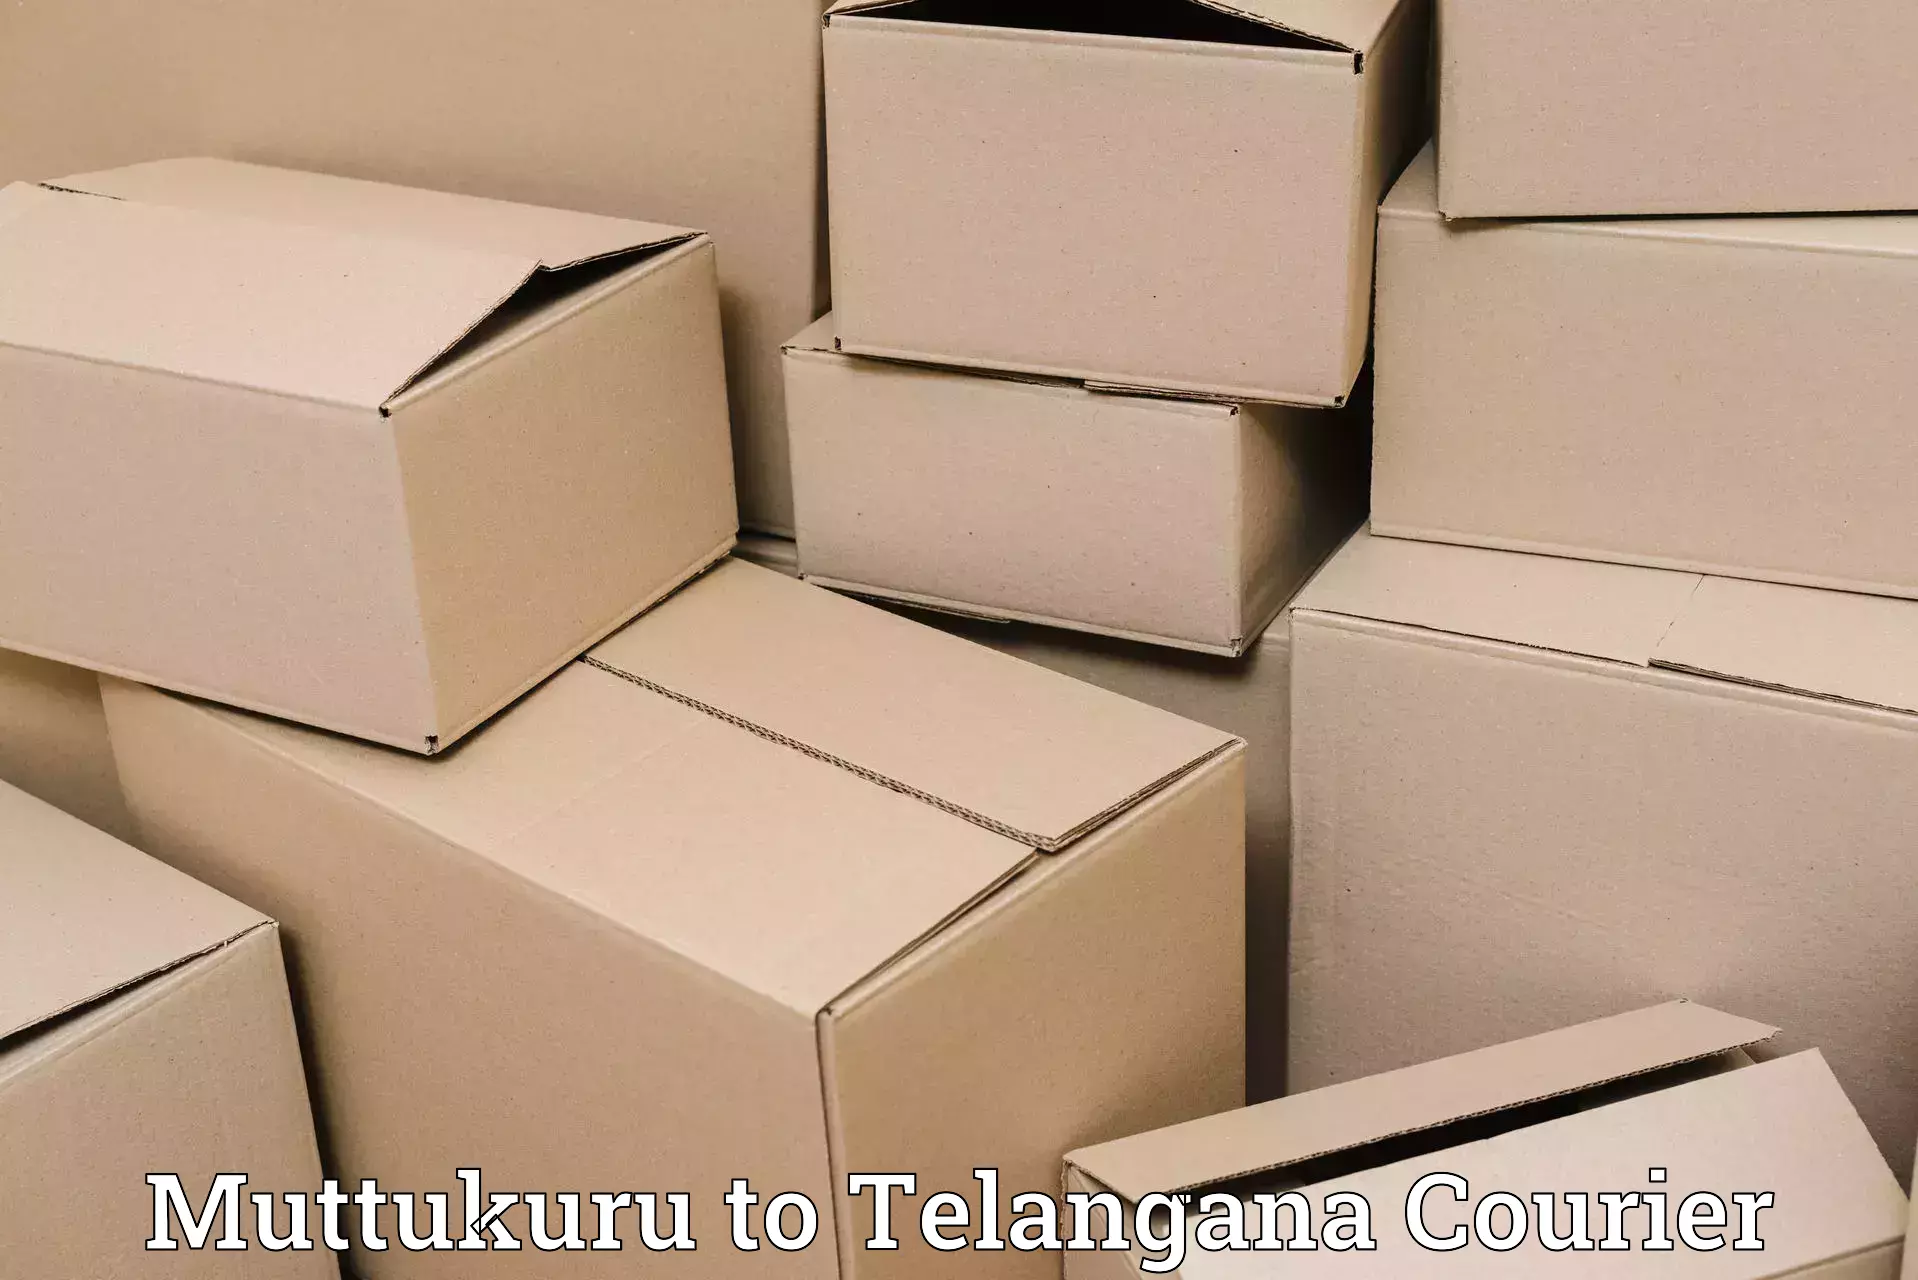 High-quality delivery services in Muttukuru to Chennur